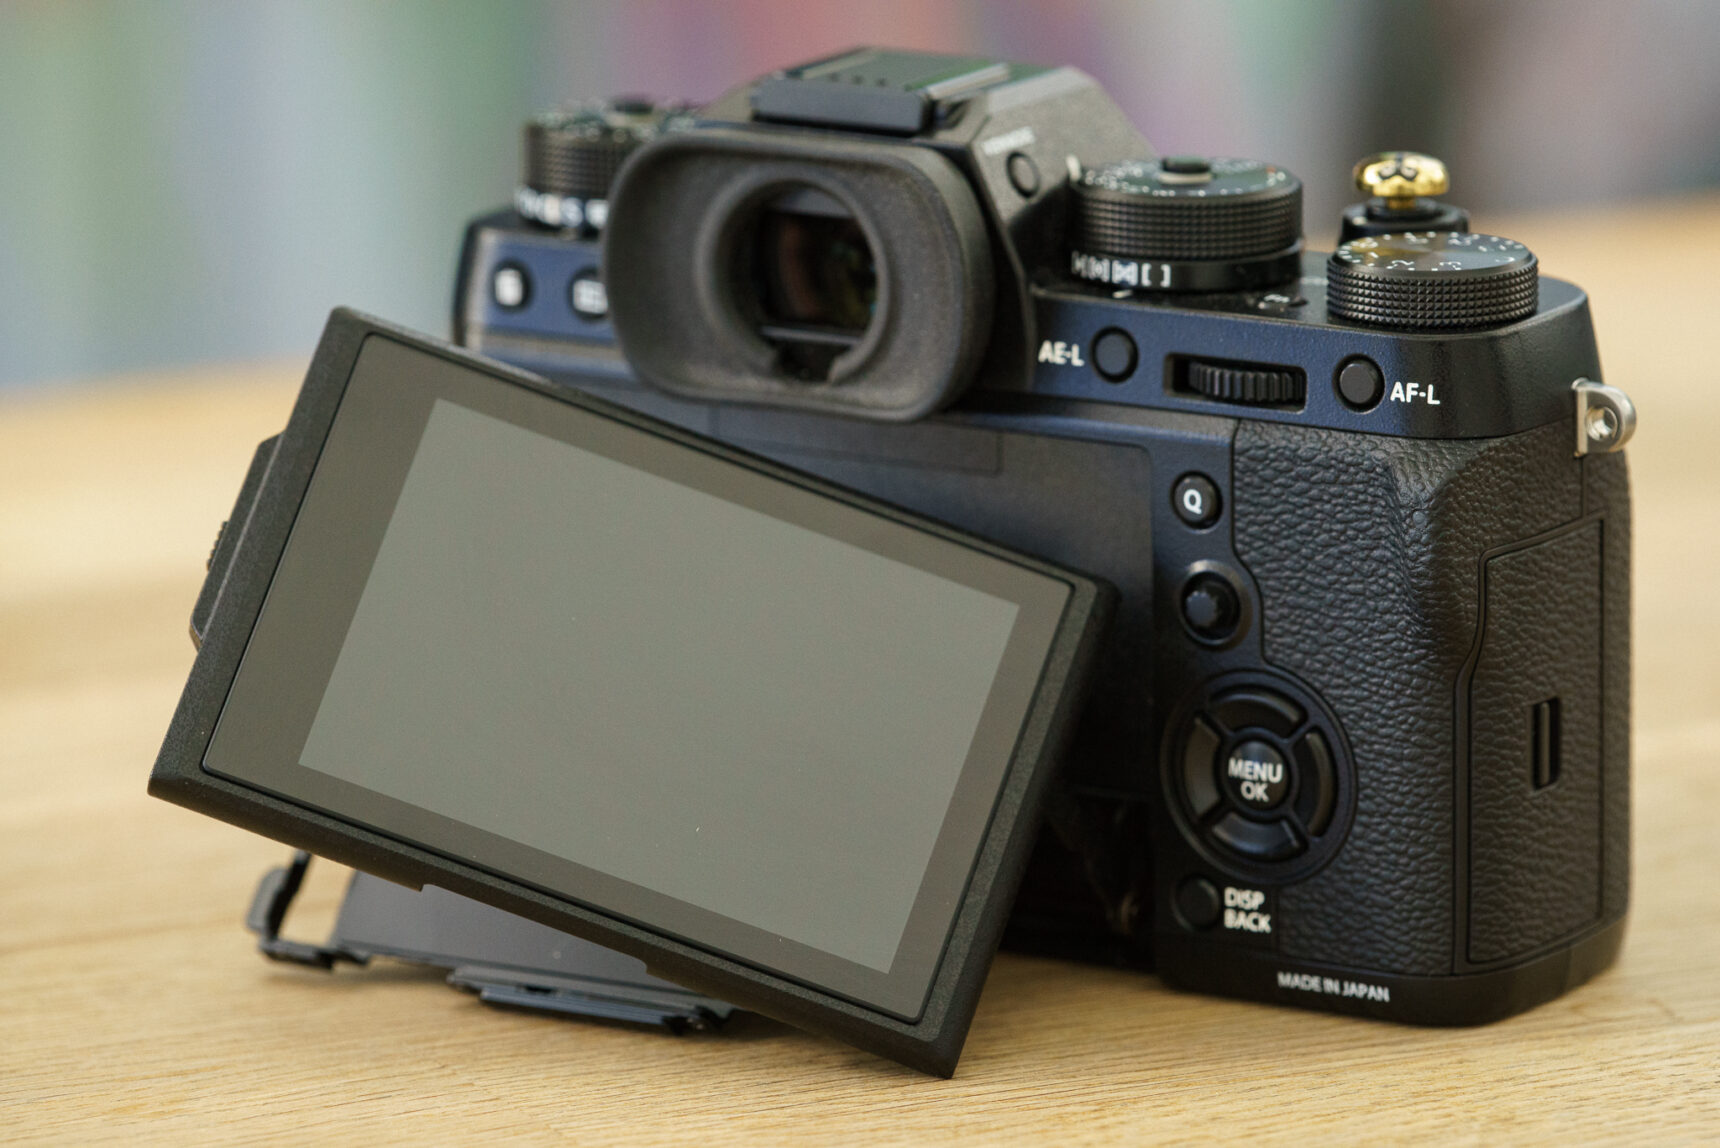 Fuji XT2 Street Photography Review - Articulated LCD